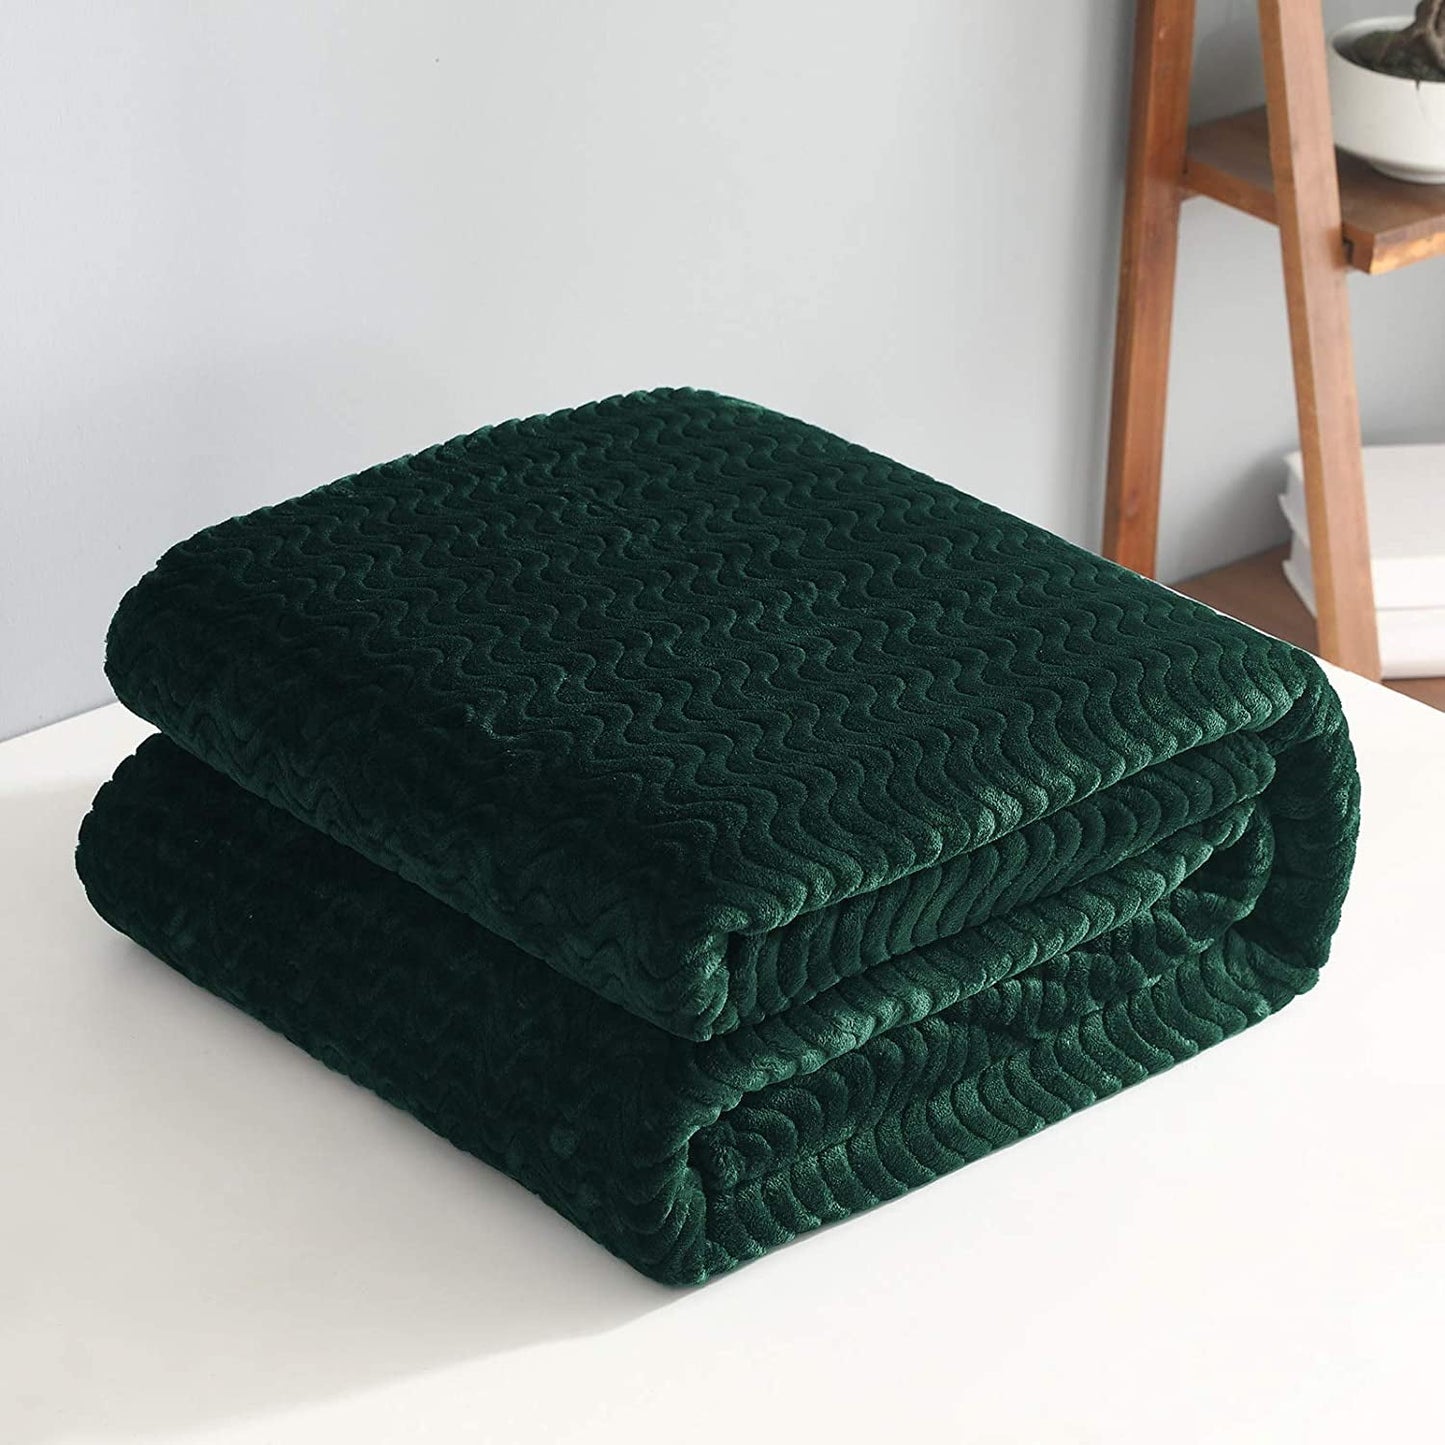 Exclusivo Mezcla King Size Jacquard Weave Wave Pattern Flannel Fleece Velvet Plush Bed Blanket as Bedspread/Coverlet/Bed Cover (90" x 104",Forest Green) - Soft, Lightweight, Warm and Cozy